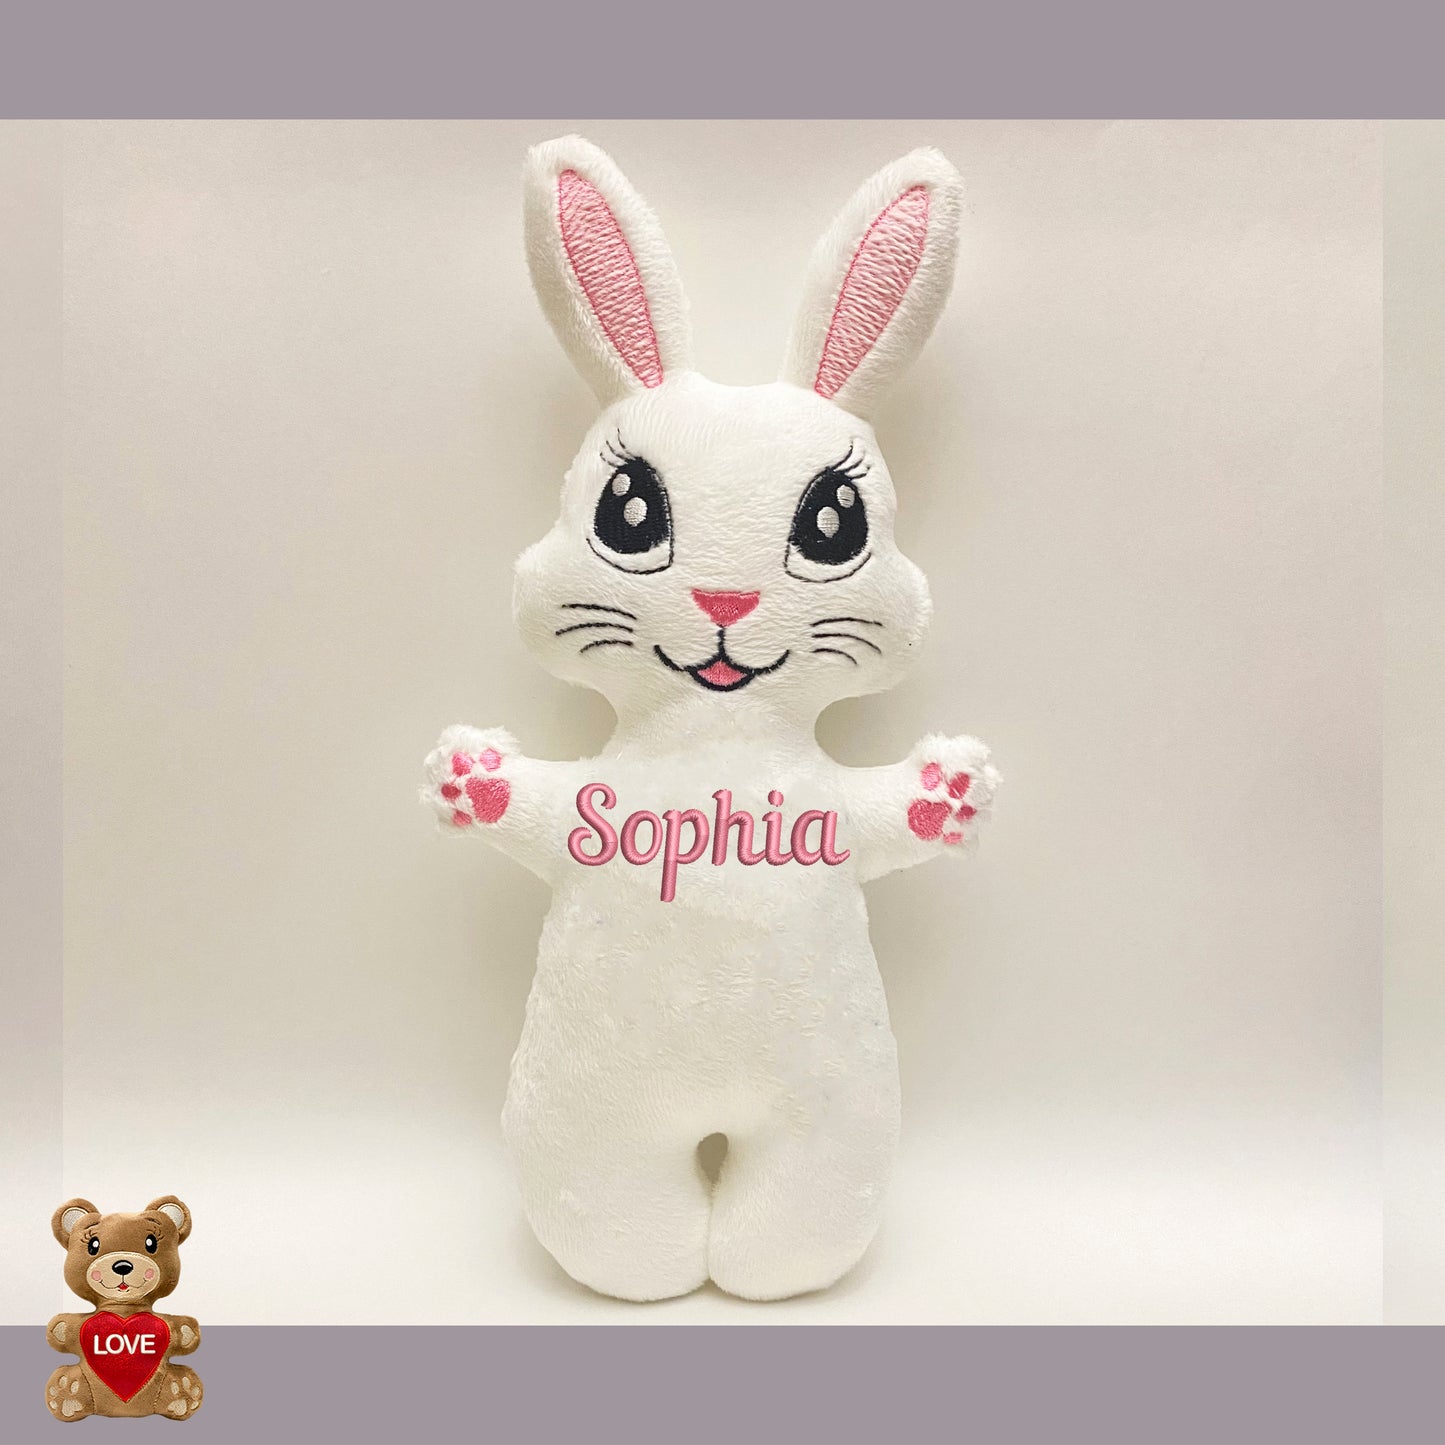 Personalised Bunny Easter Stuffed Toy ,Super cute personalised soft plush toy, Personalised Gift, Unique Personalized Birthday Gifts , Custom Gifts For Children